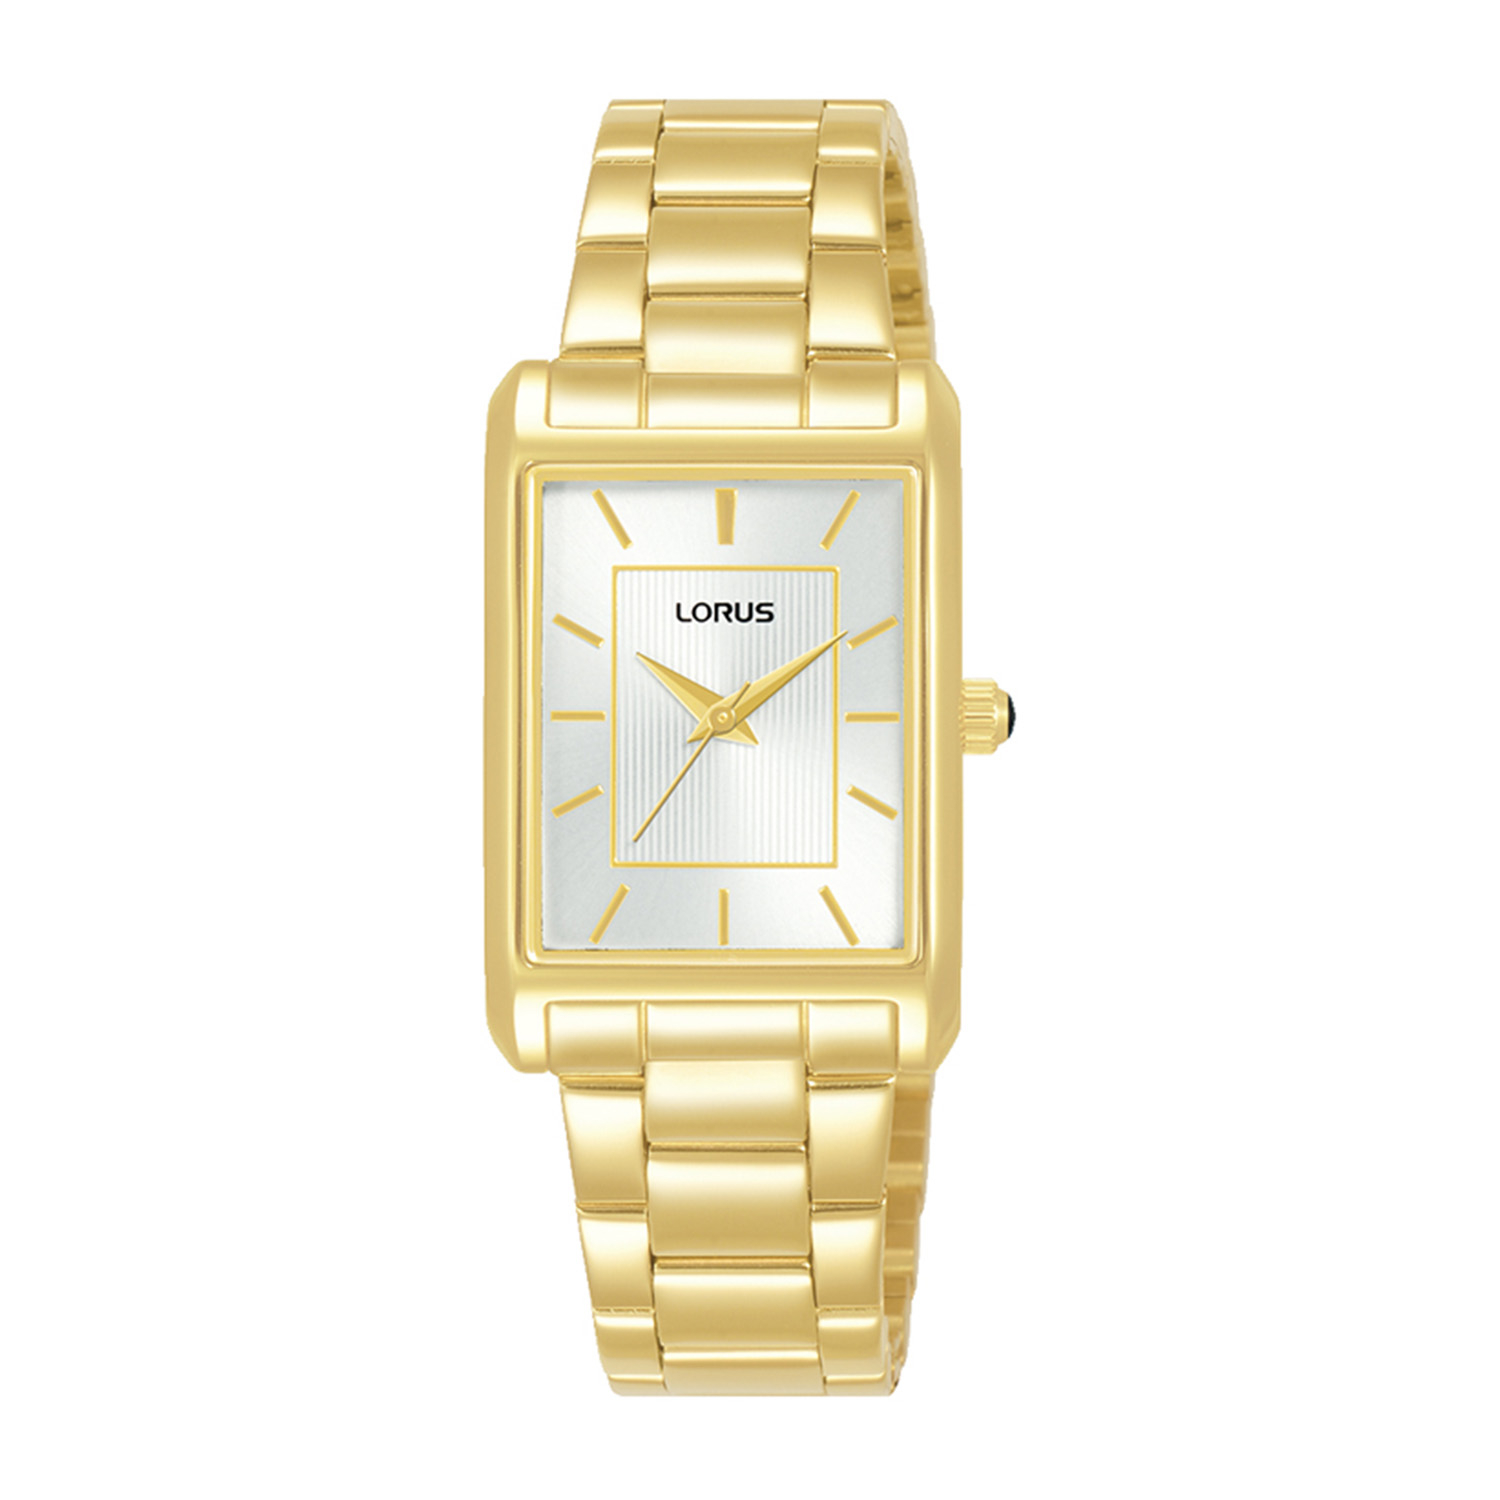 Womens watch LORUS made of gold stainless steel with white dial and bracelet.